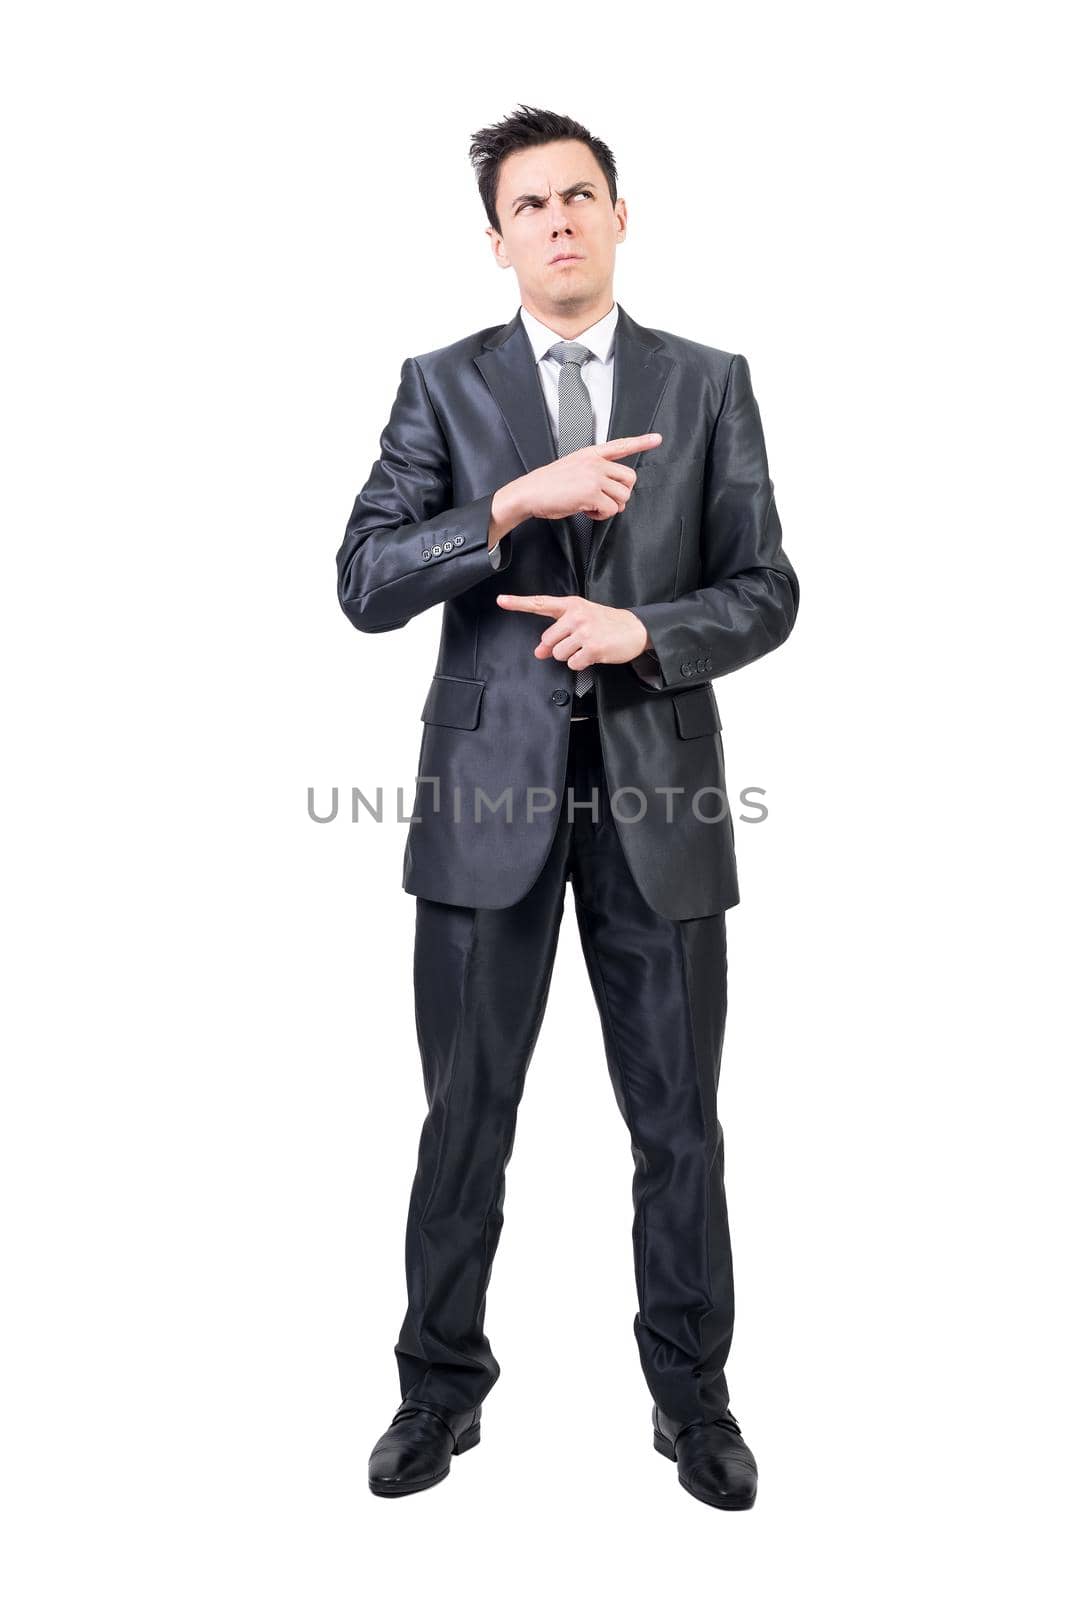 Puzzled man in formal suit pointing with fingers and looking up with serious face isolated on white background in light studio